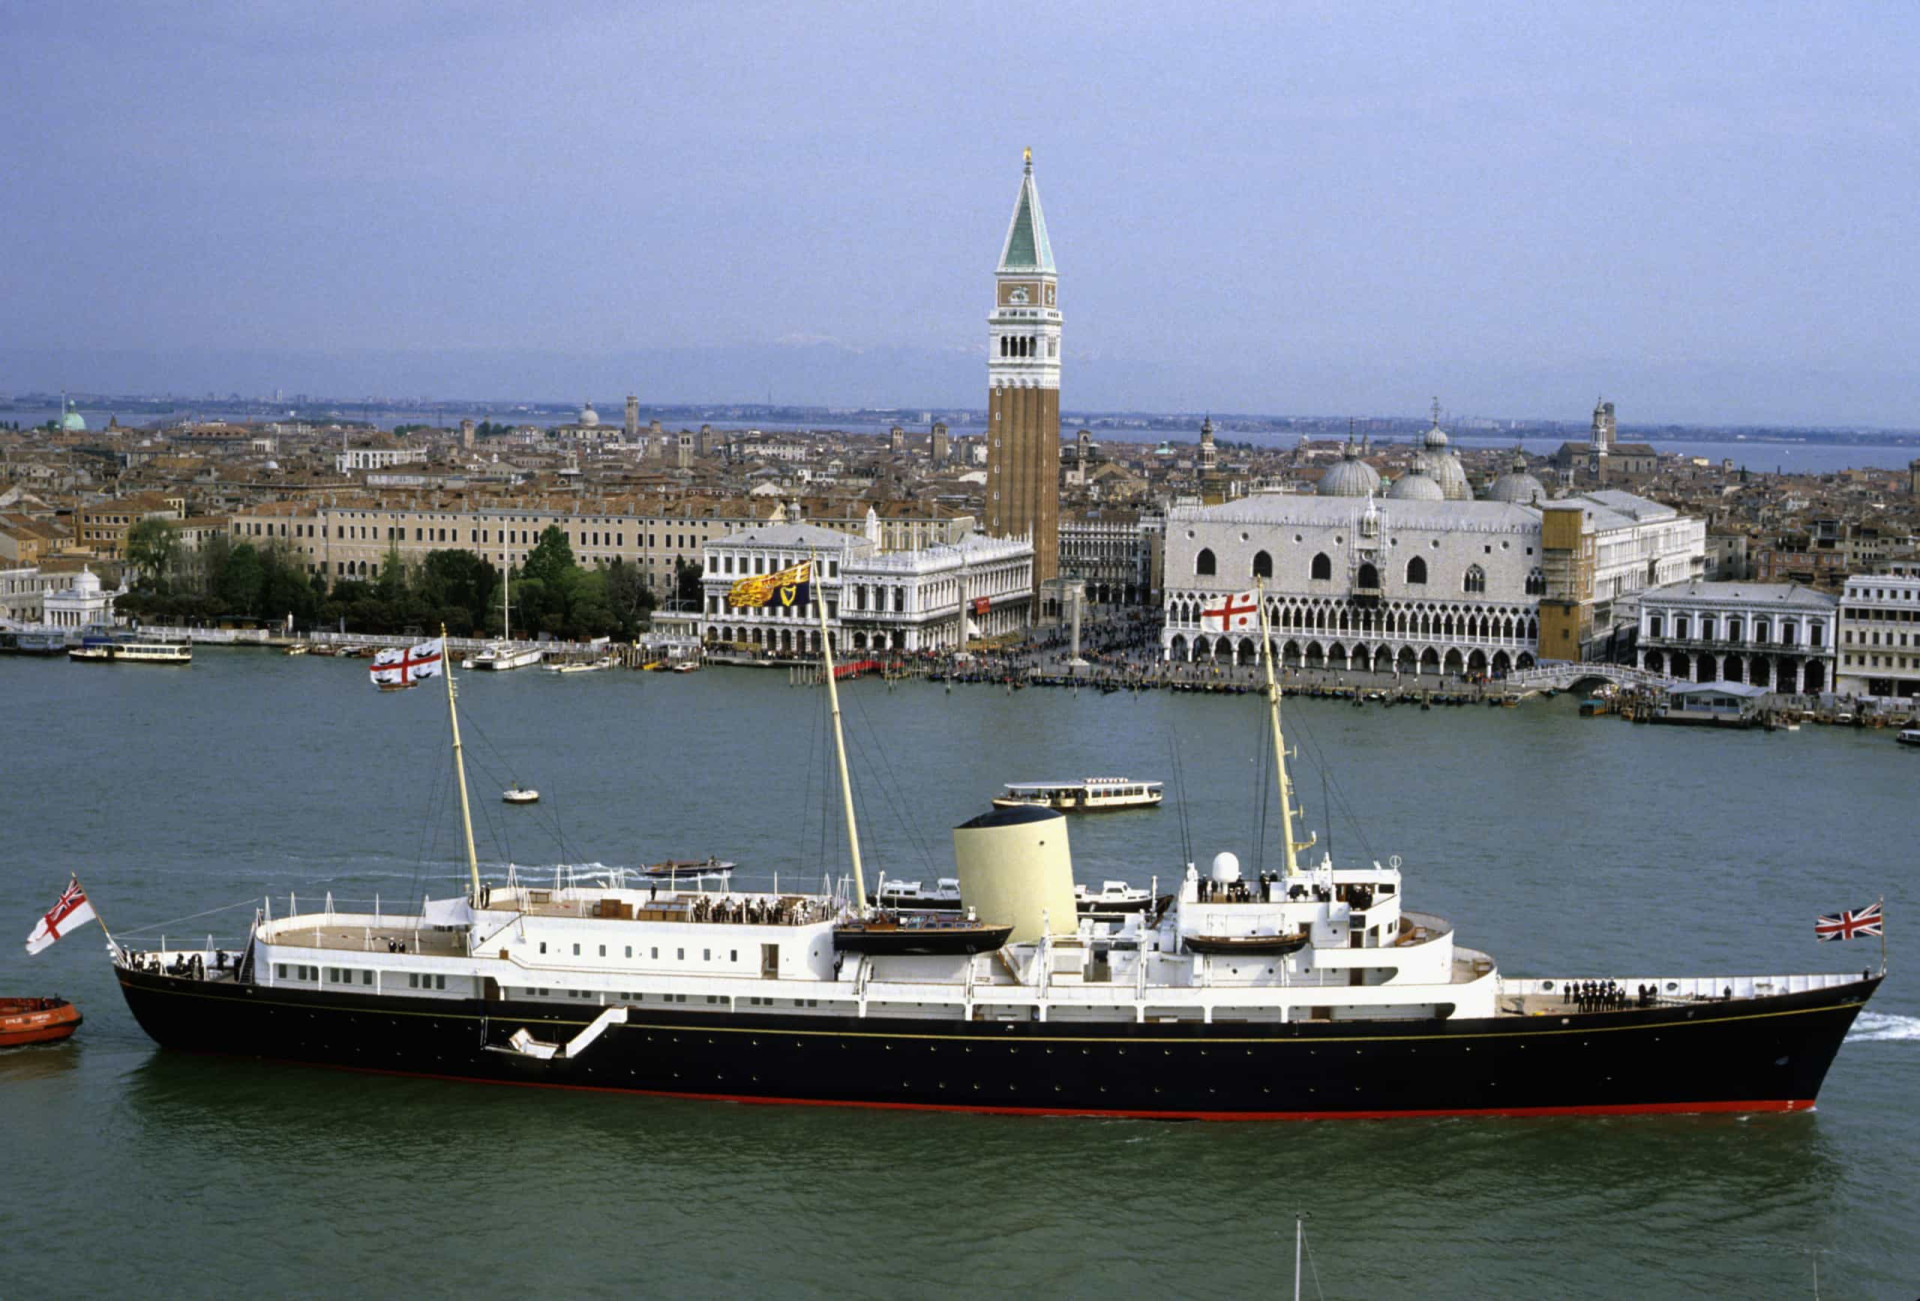 <p>Many Italians described the tour as a "second honeymoon" for the royal couple. Meanwhile, cities like Venice certainly provided a beautiful and historic backdrop for HMY <em>Britannia</em>.</p><p><a href="https://www.msn.com/en-sg/community/channel/vid-7xx8mnucu55yw63we9va2gwr7uihbxwc68fxqp25x6tg4ftibpra?cvid=94631541bc0f4f89bfd59158d696ad7e">Follow us and access great exclusive content every day</a></p>